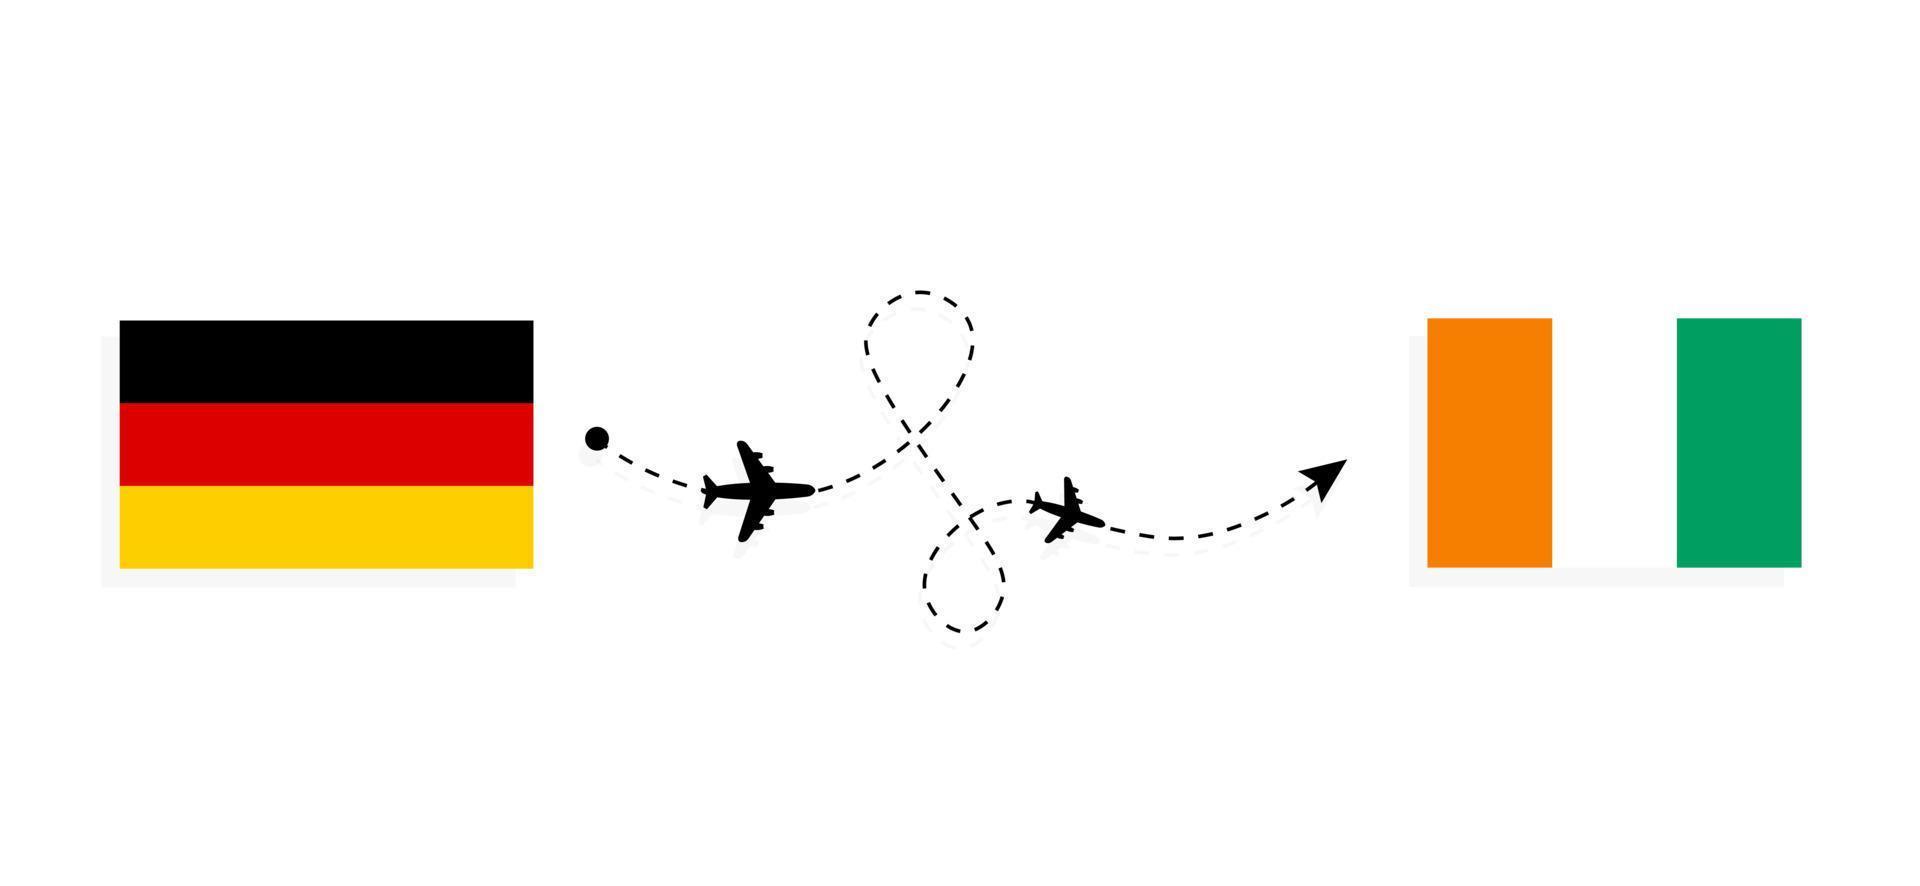 Flight and travel from Germany to Cote d'Ivoire by passenger airplane Travel concept vector